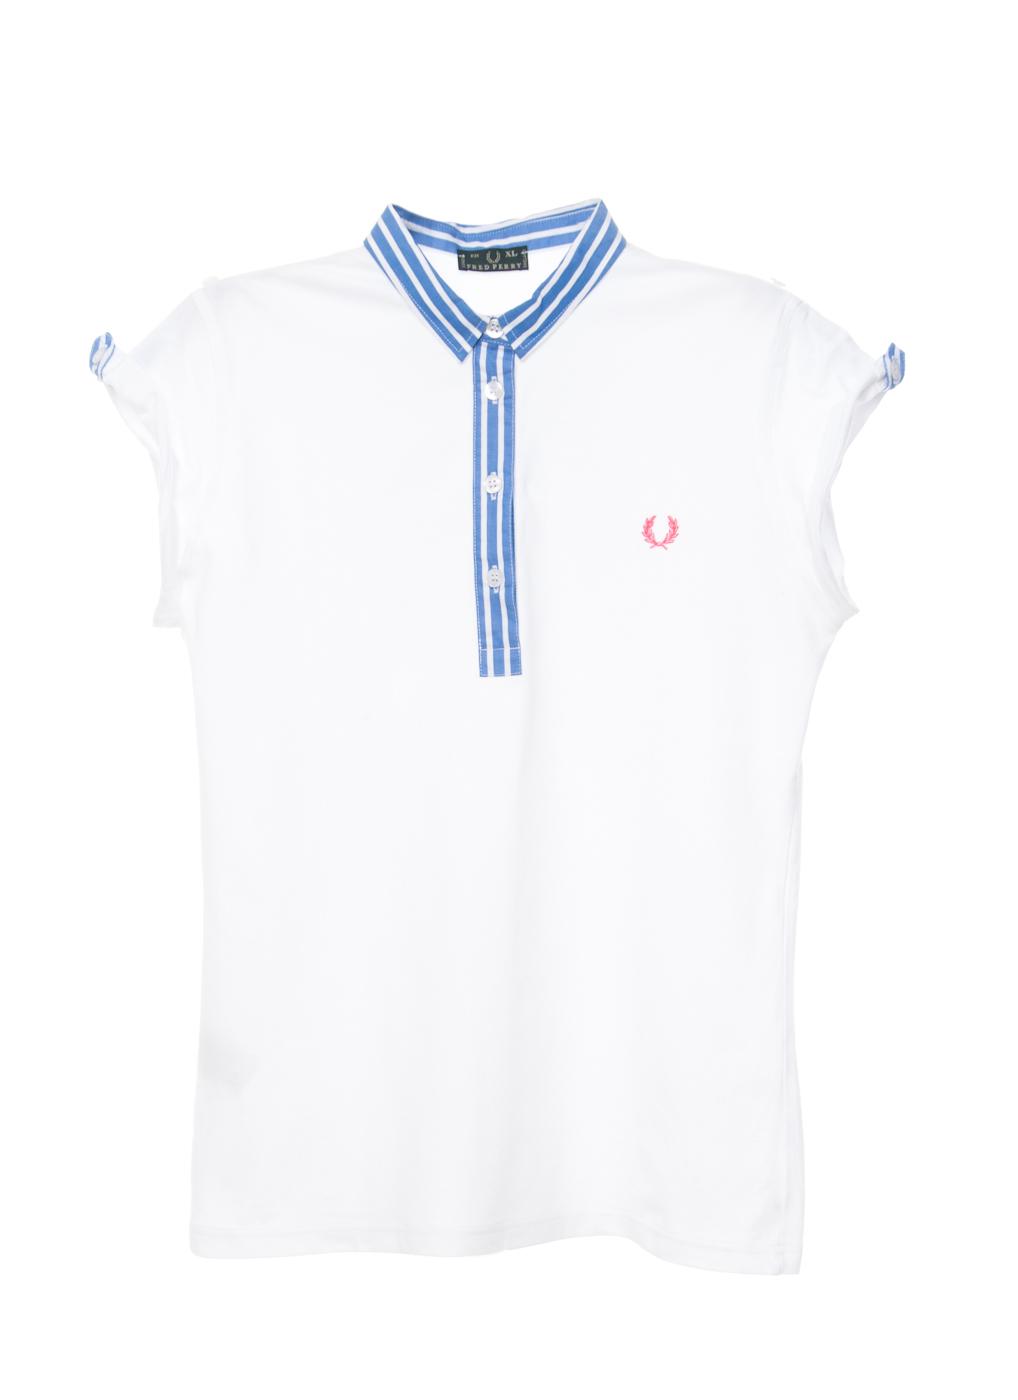 Foto Polo Fred Perry Rayas